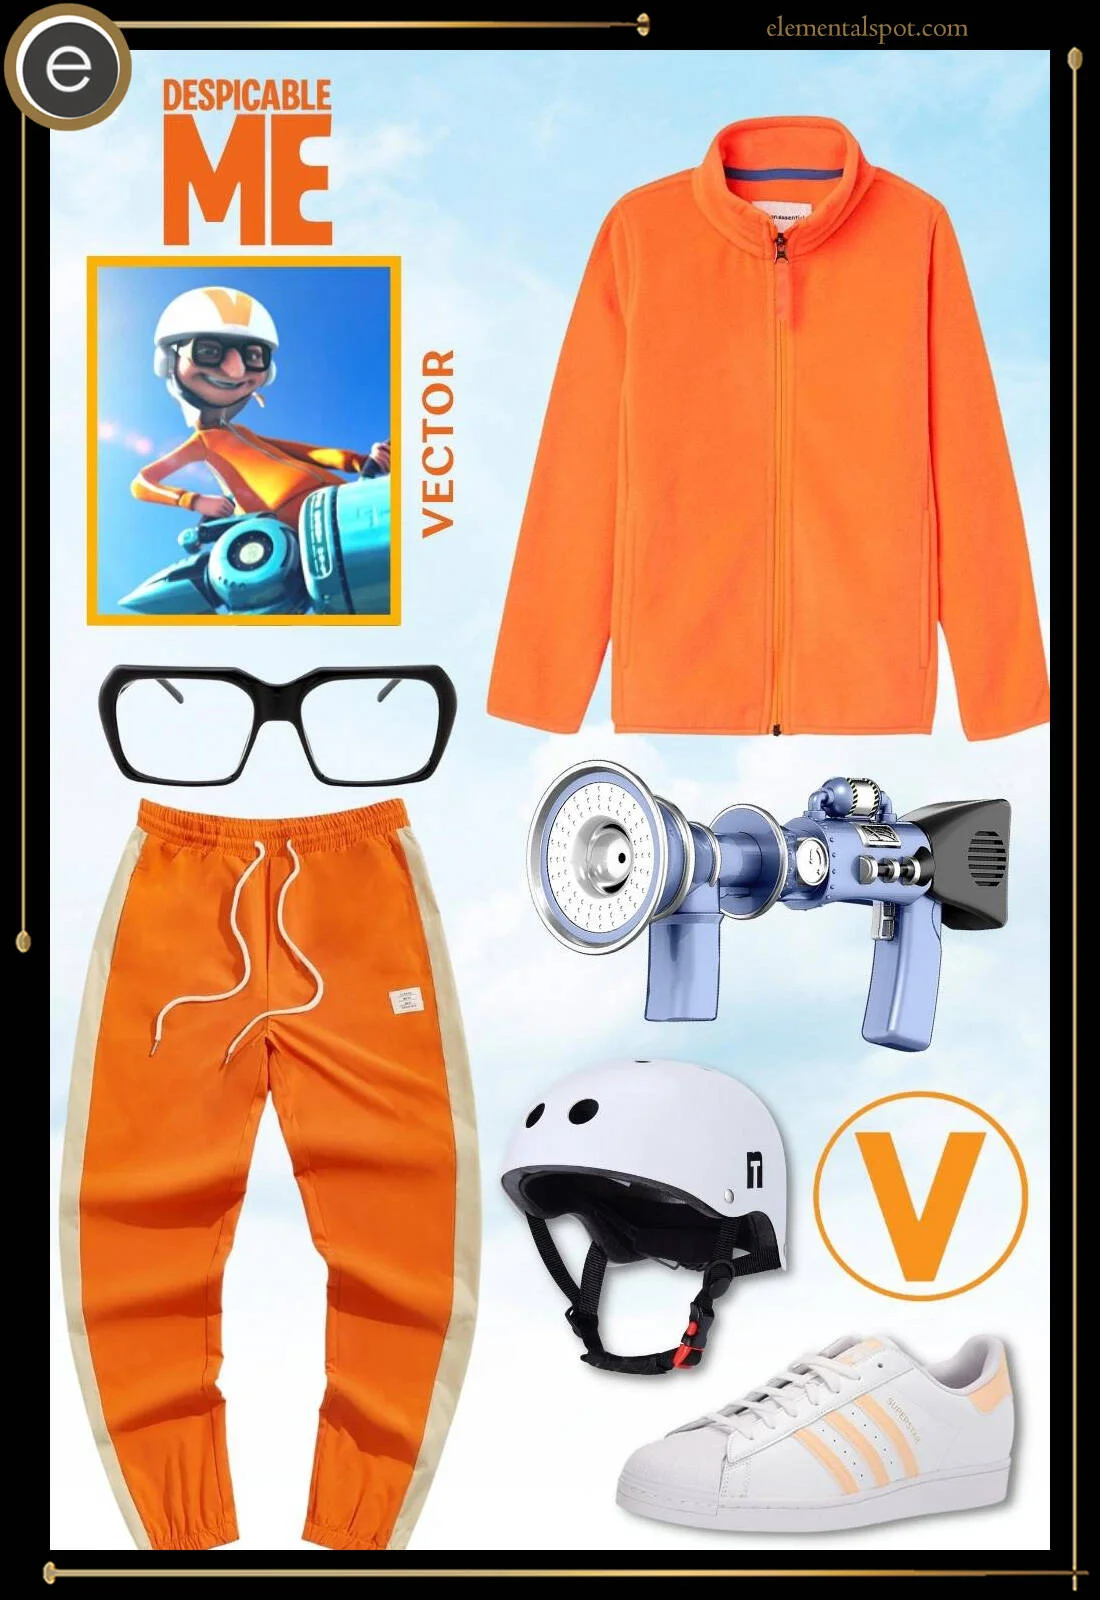 Dress Up Like Vector from Despicable Me - Elemental Spot